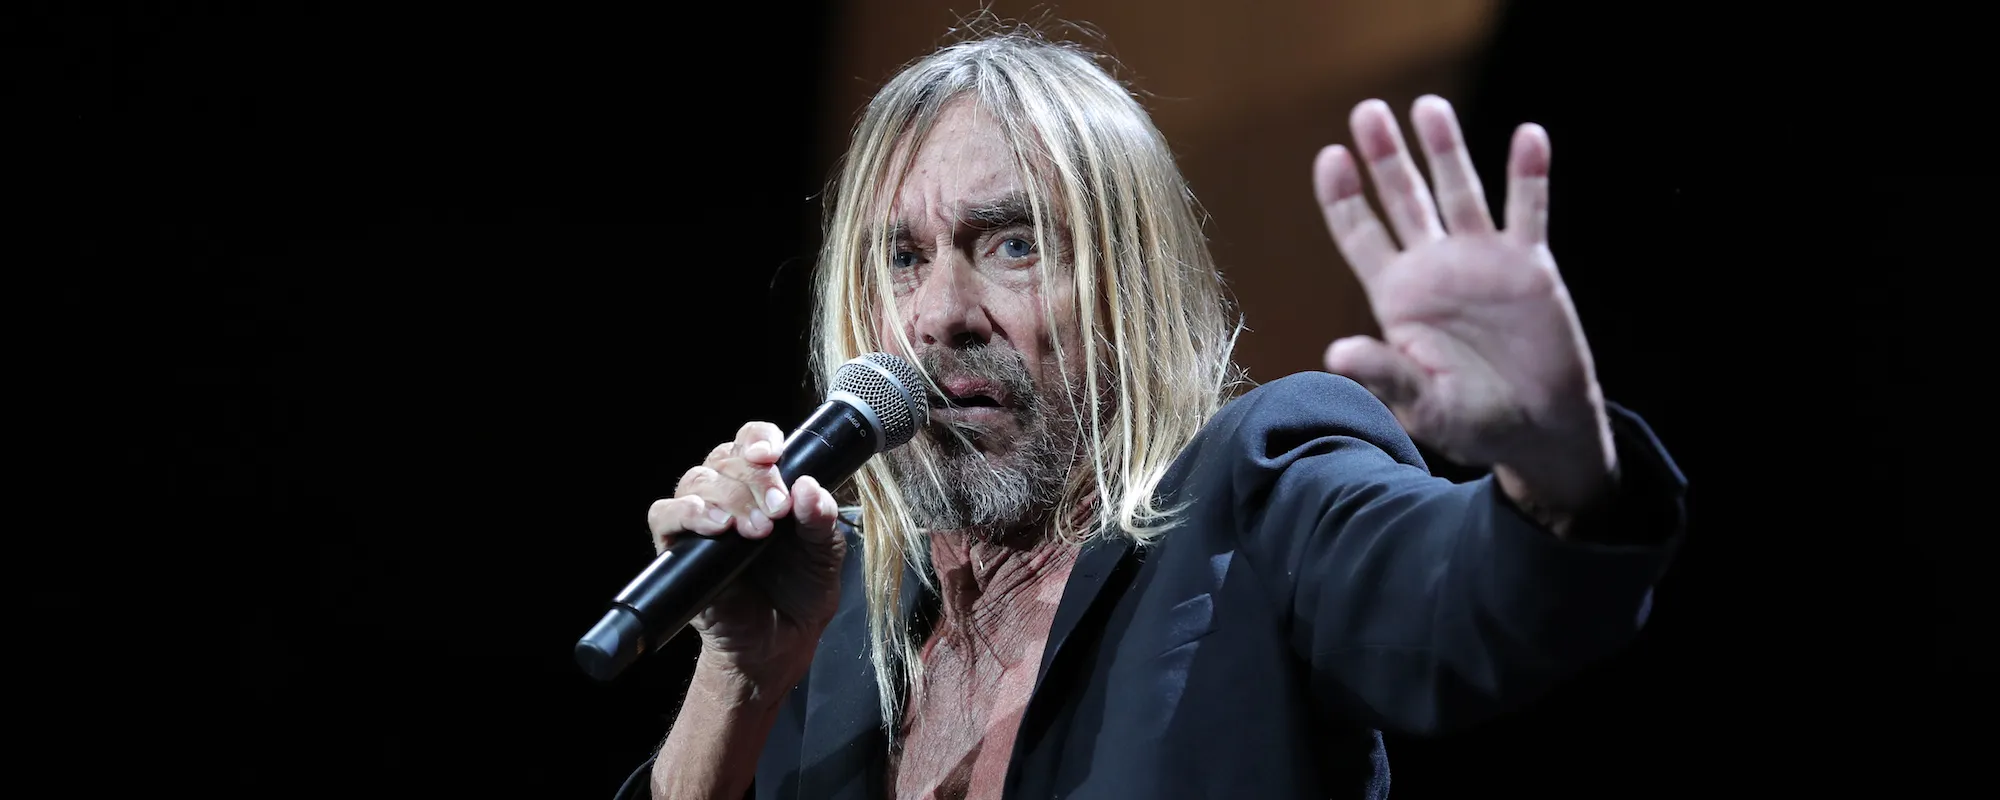 The Crosby, Stills & Nash Song That Iggy Pop Called “The Worst Song Ever Written”